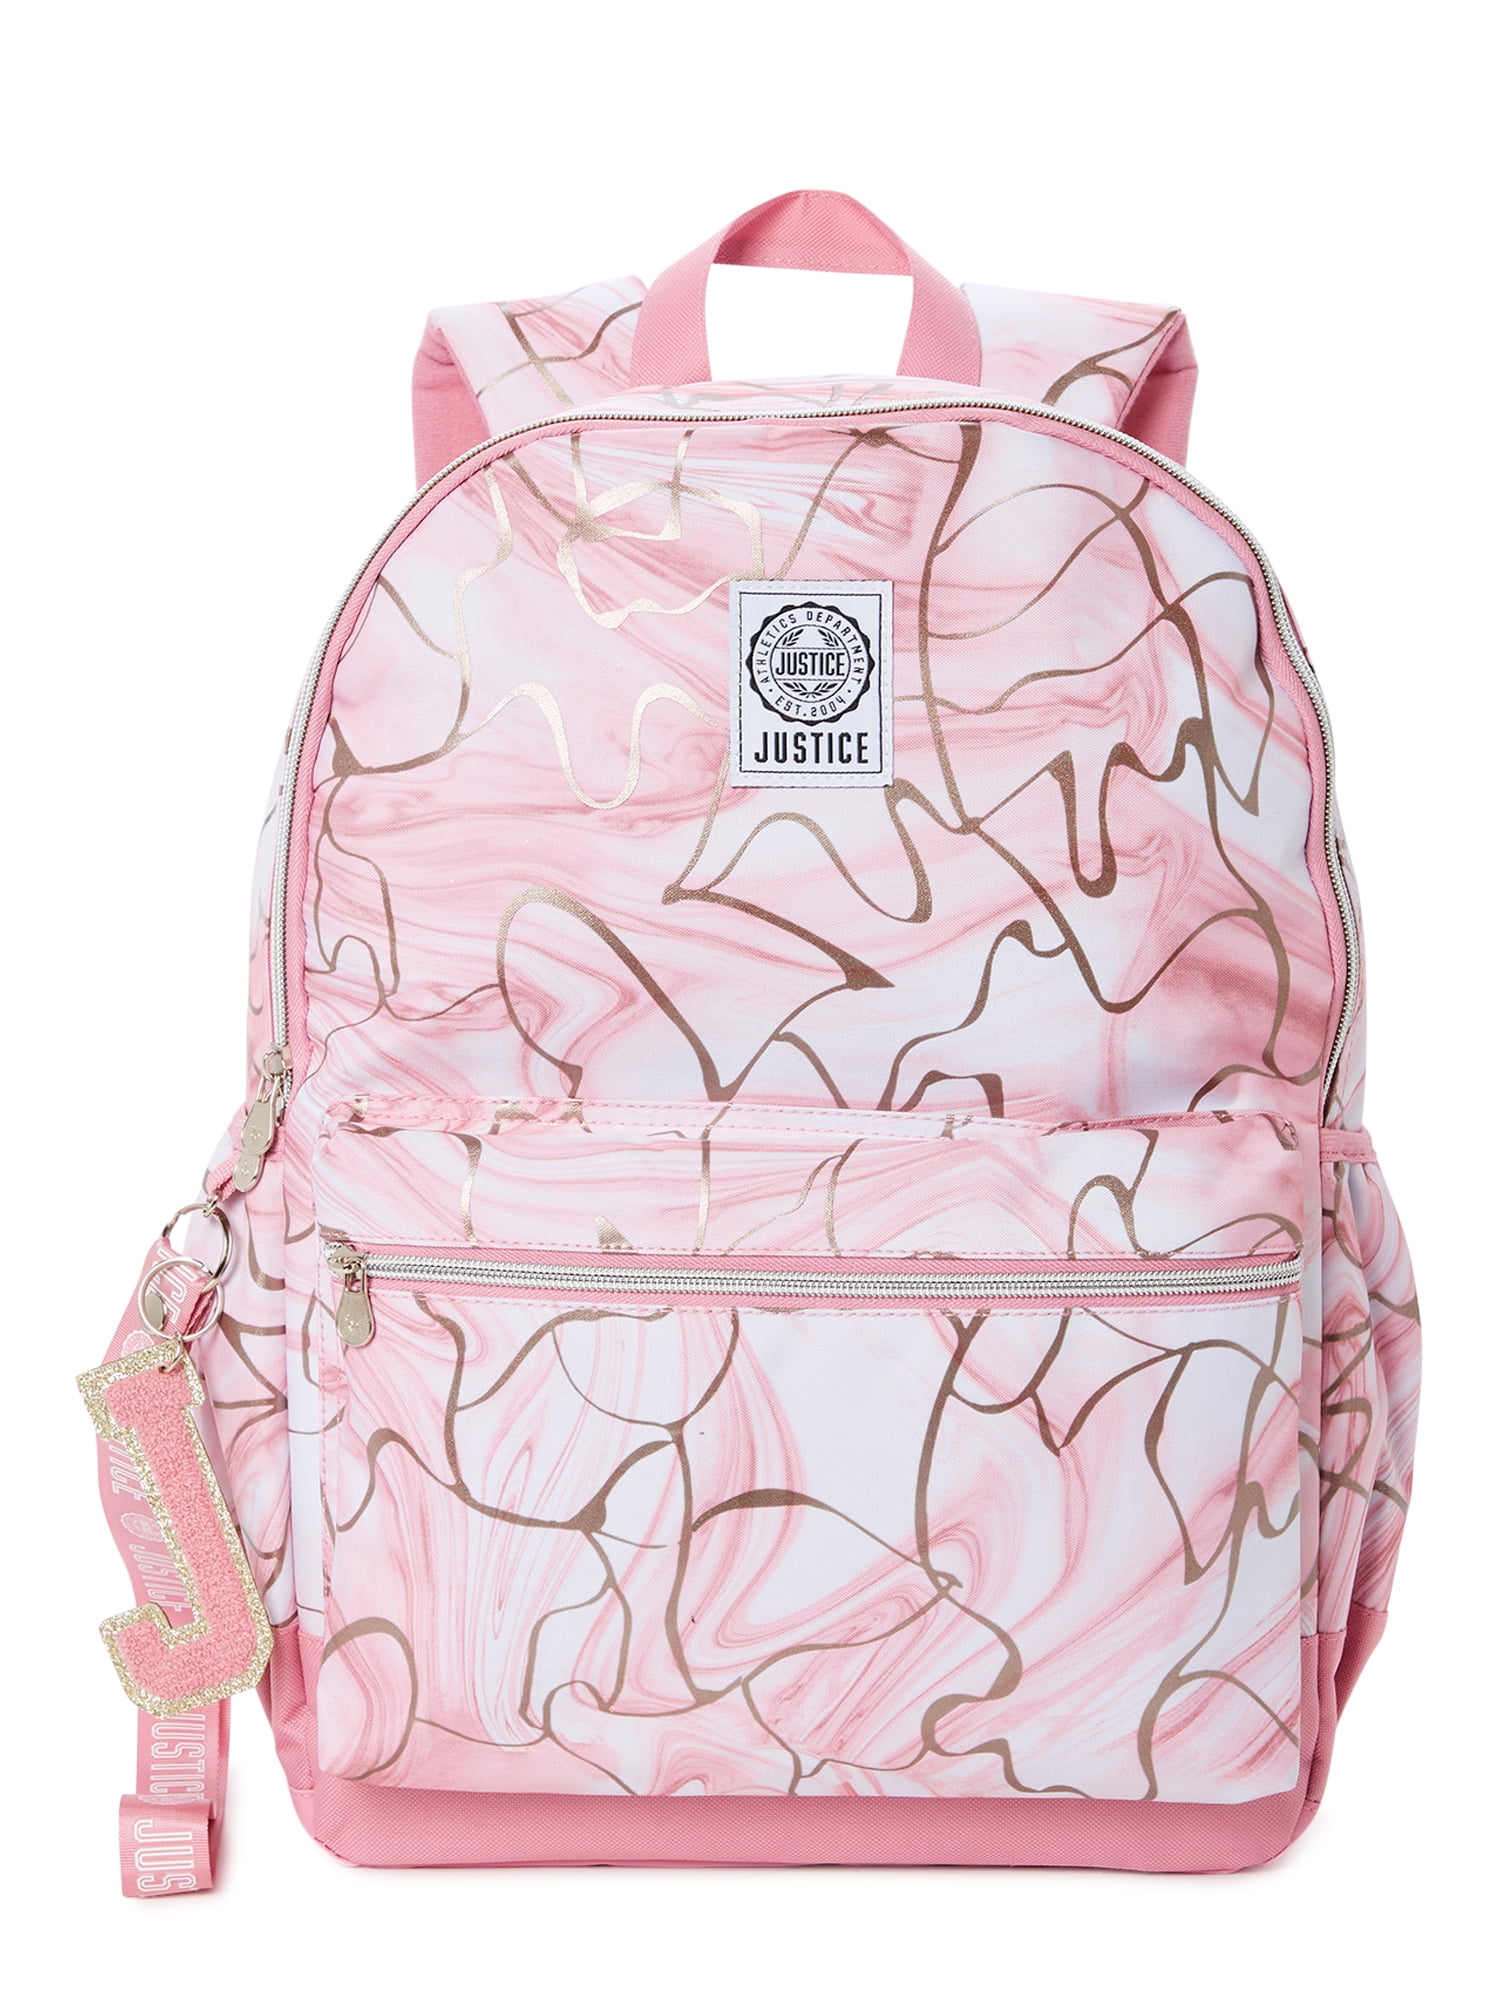 Marbled Mini Backpack - Pink & White  Bags, Stylish school bags, Pink  backpack